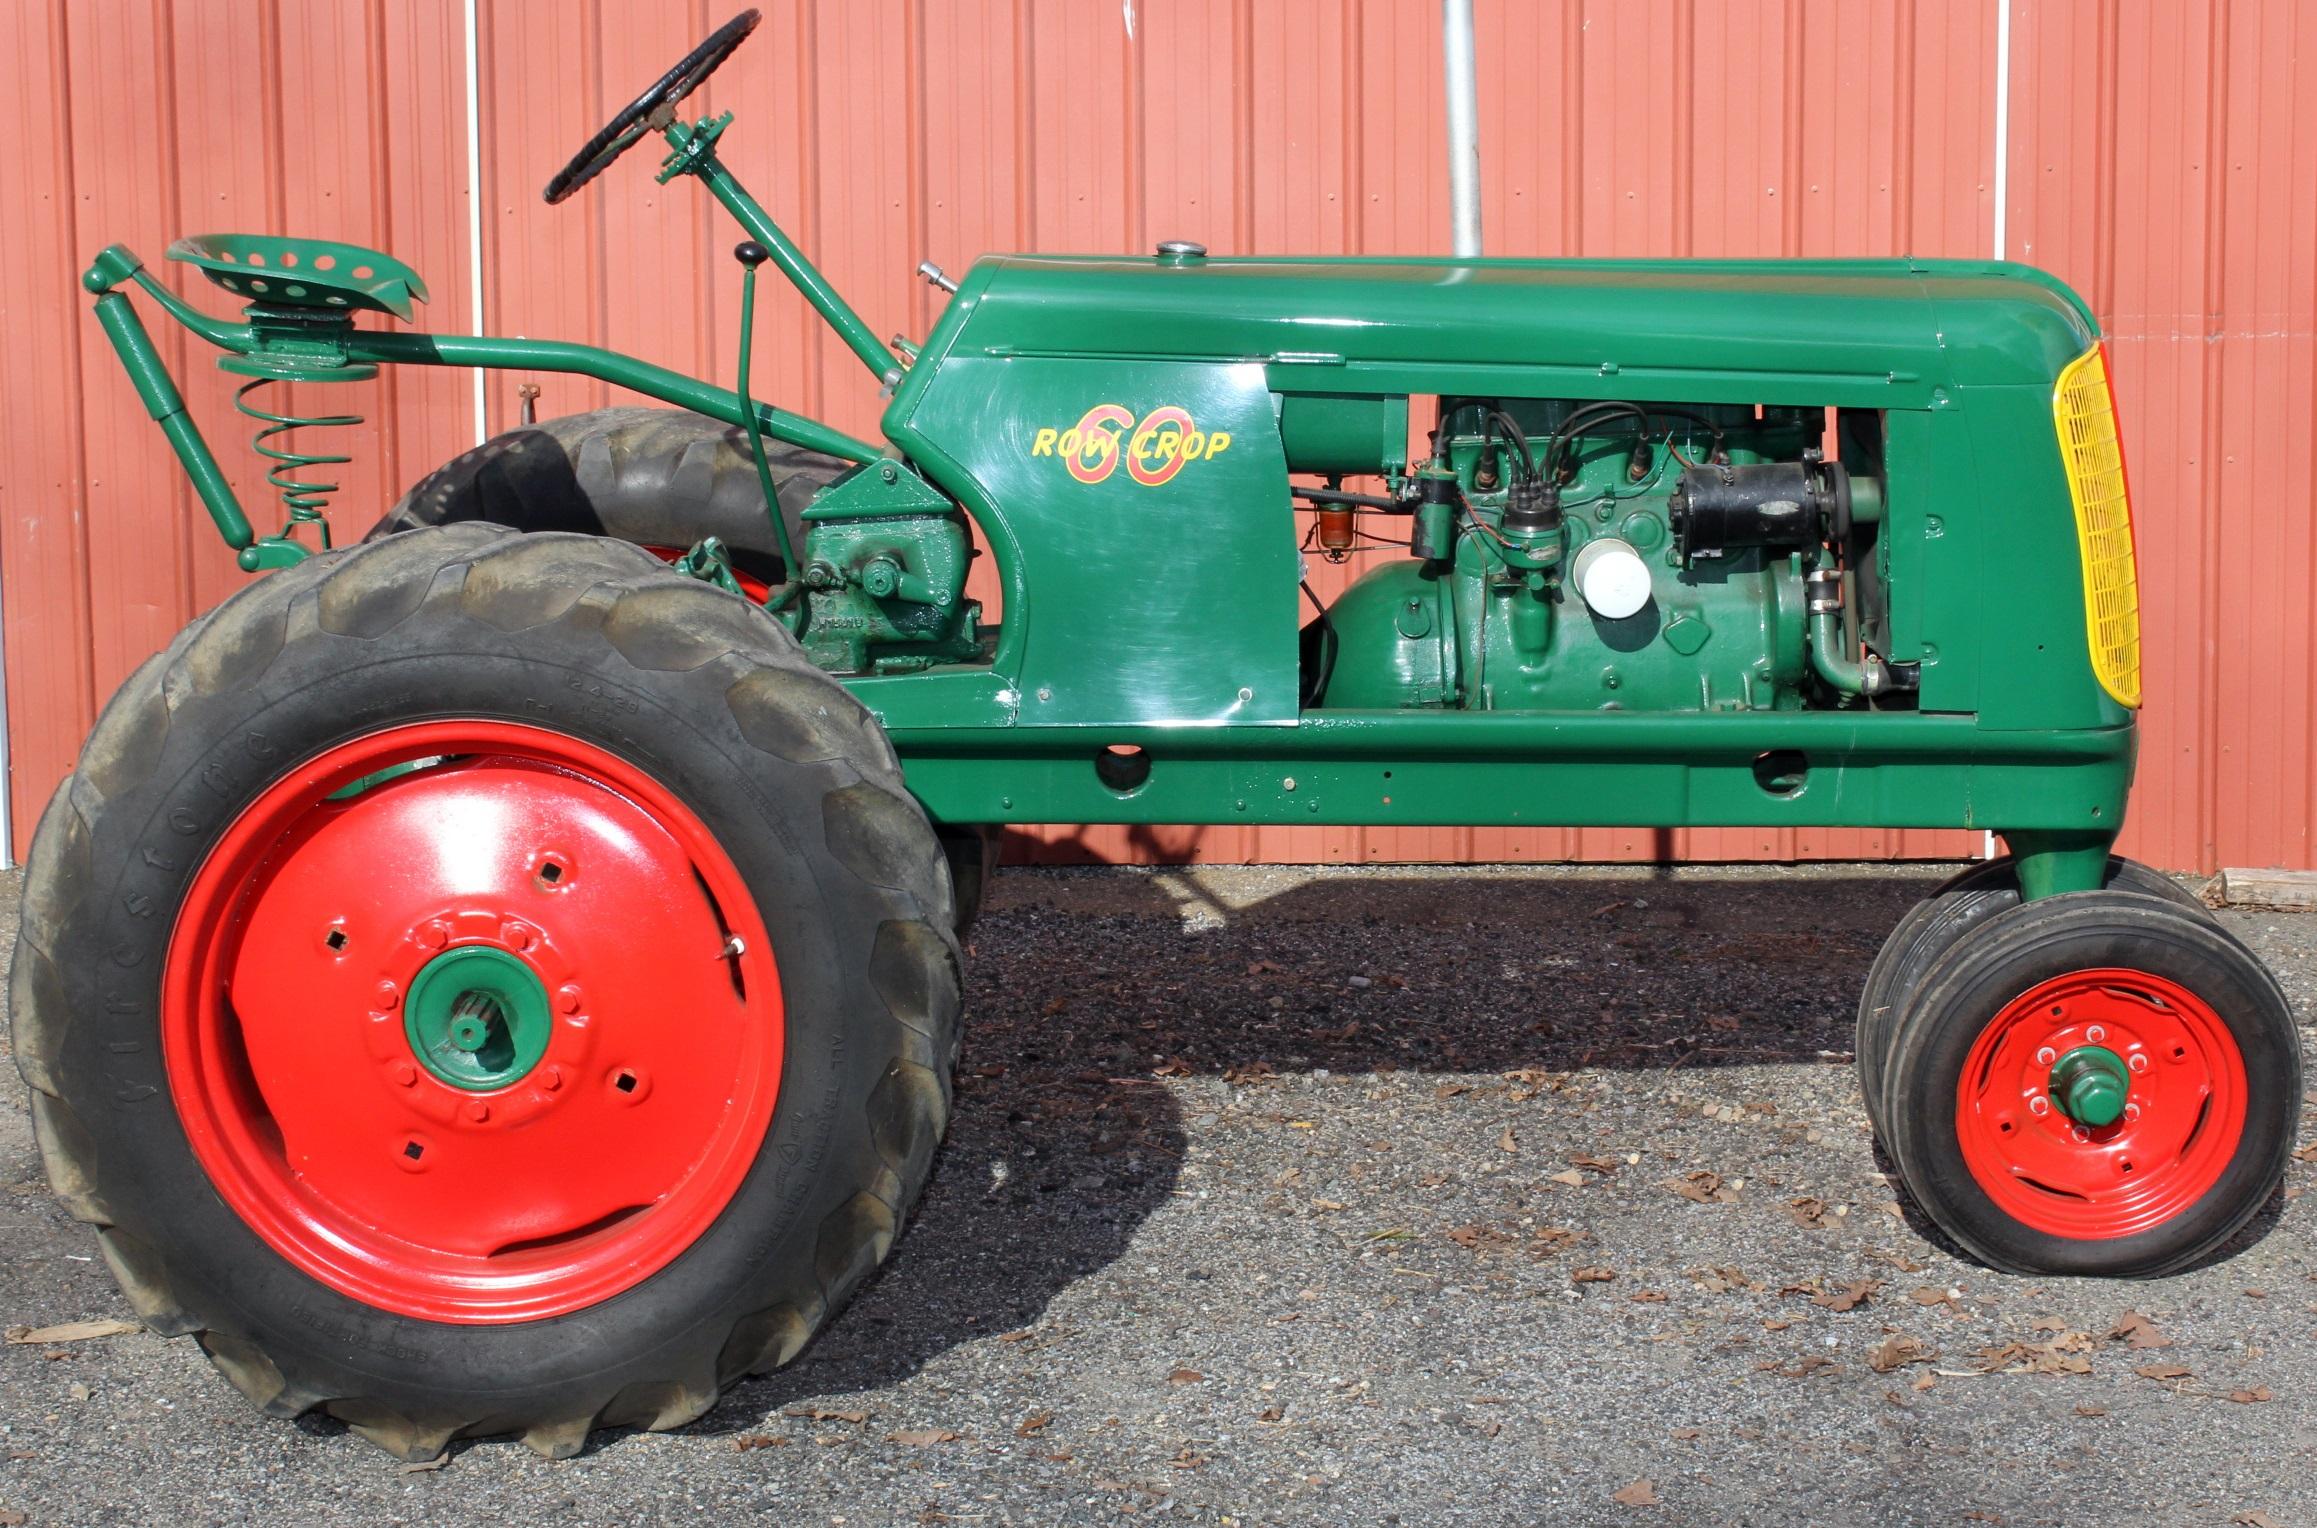 1948 Oliver 60 tractor, new paint, Serial No. 621112